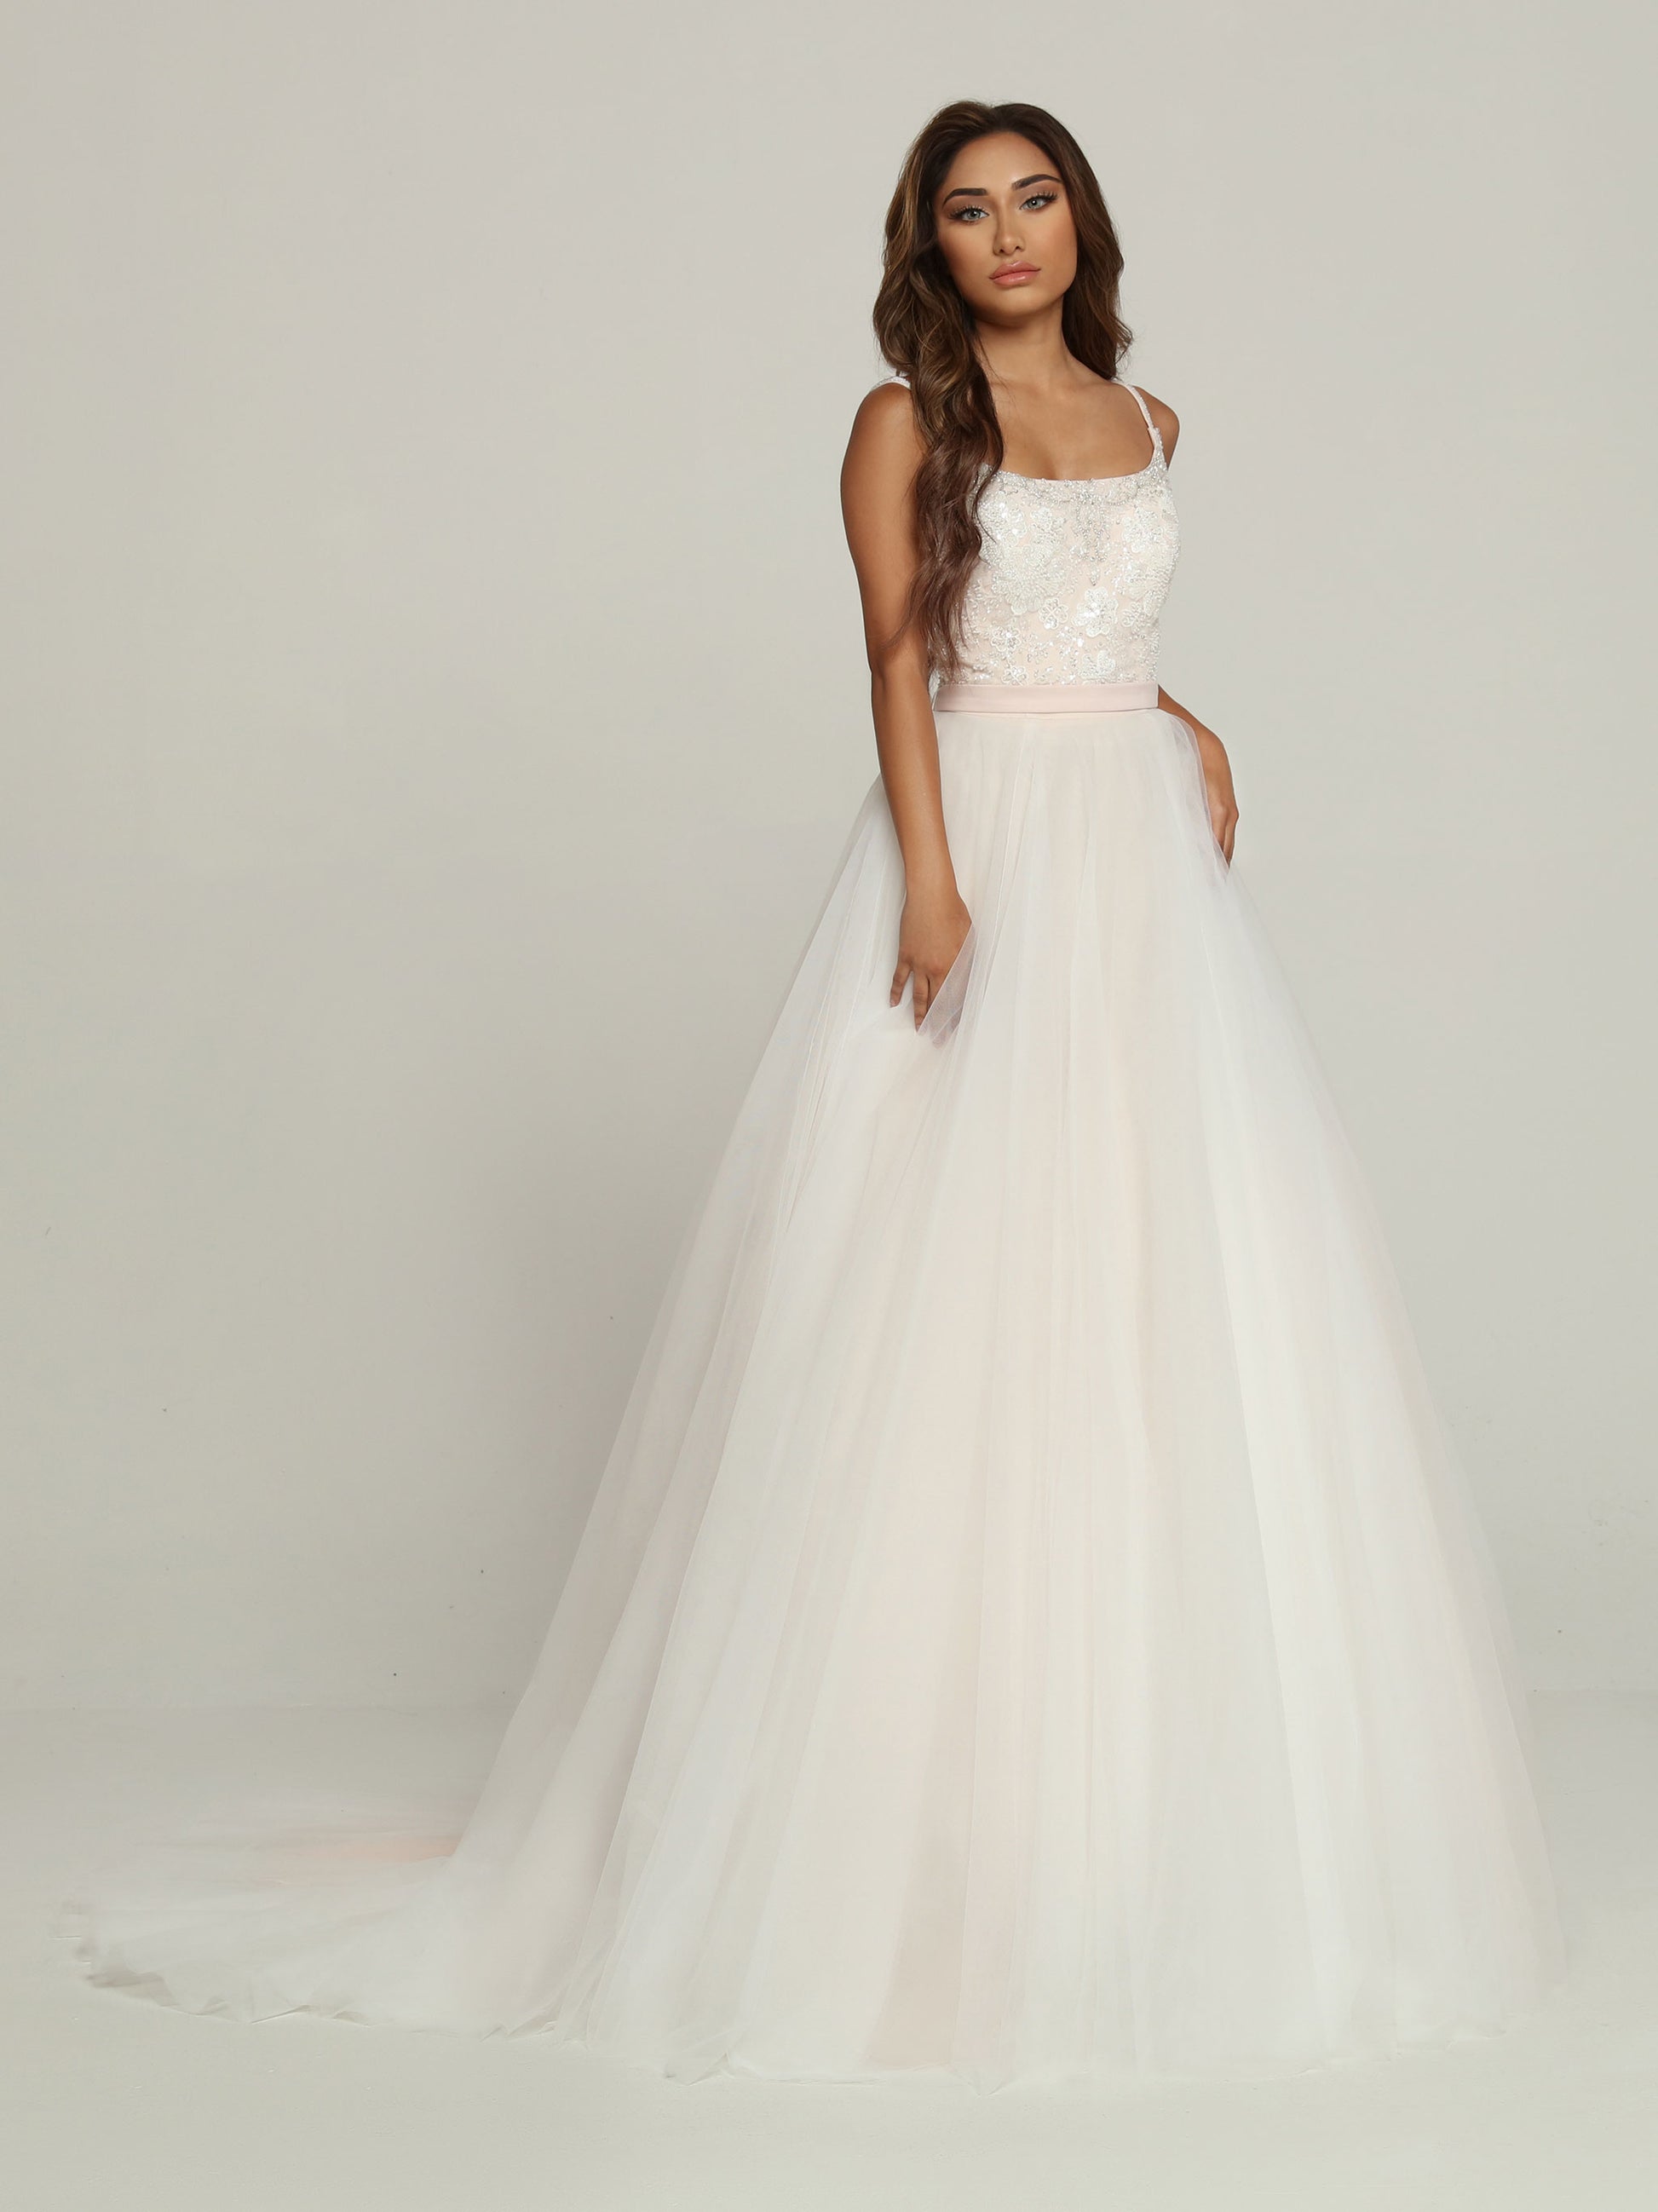 Davinci Bridal 50687 A Line Tulle Wedding Dress Beaded Baby Doll Bodice Bridal Gown Beautiful & Modest, this Fairytale Tulle A-Line Ball Gown Wedding Dress features a High Scoop Neckline, Deep V-Back & Slender Shoulder Straps. Beaded Lace Applique Covers the Bodice & Straps & Sets off the Generously Layered Tulle Skirt with Chapel Train. A Slender Waistband Belt is the Finishing Touch.